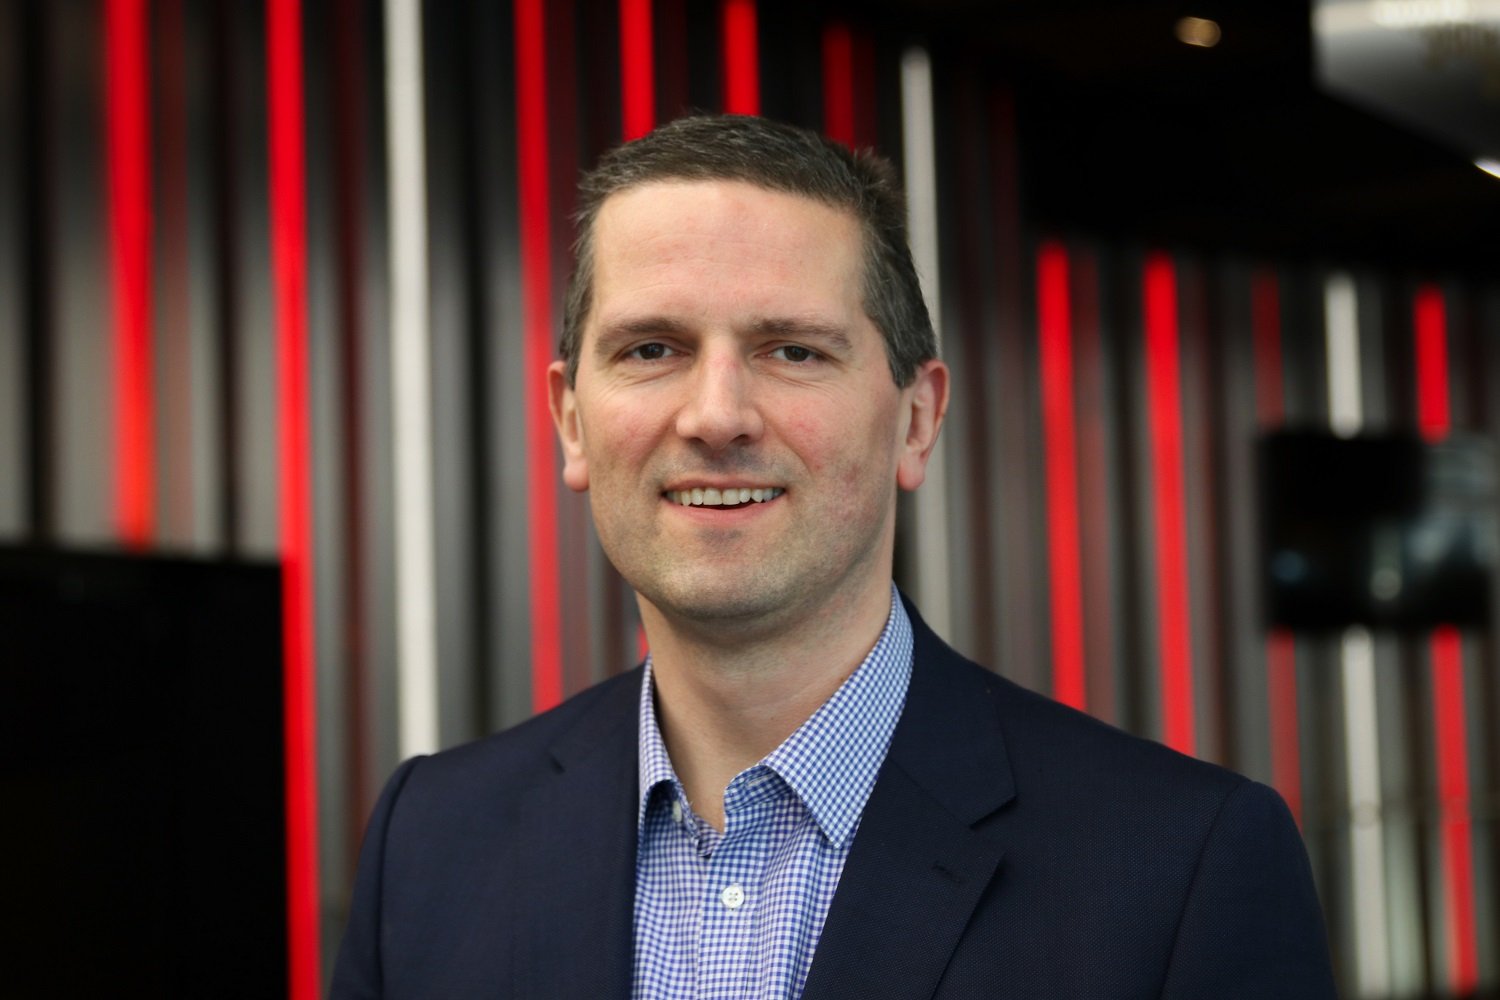 Dave O’Shaughnessy, Healthcare vertical lead for APAC and EMEA, Avaya